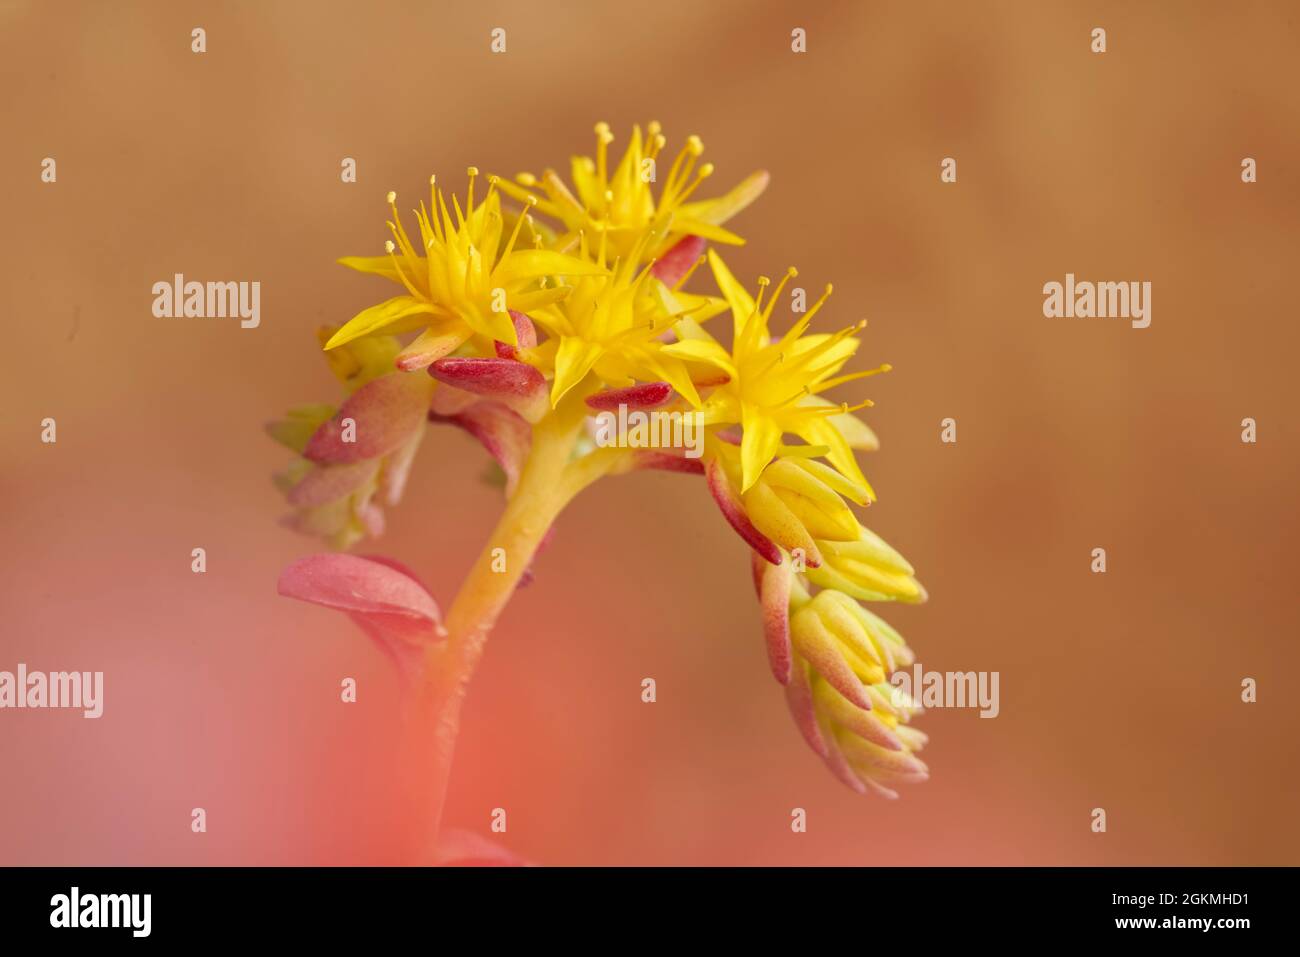 cluster of ornamental yellow flowers on orange background. Spain Stock Photo